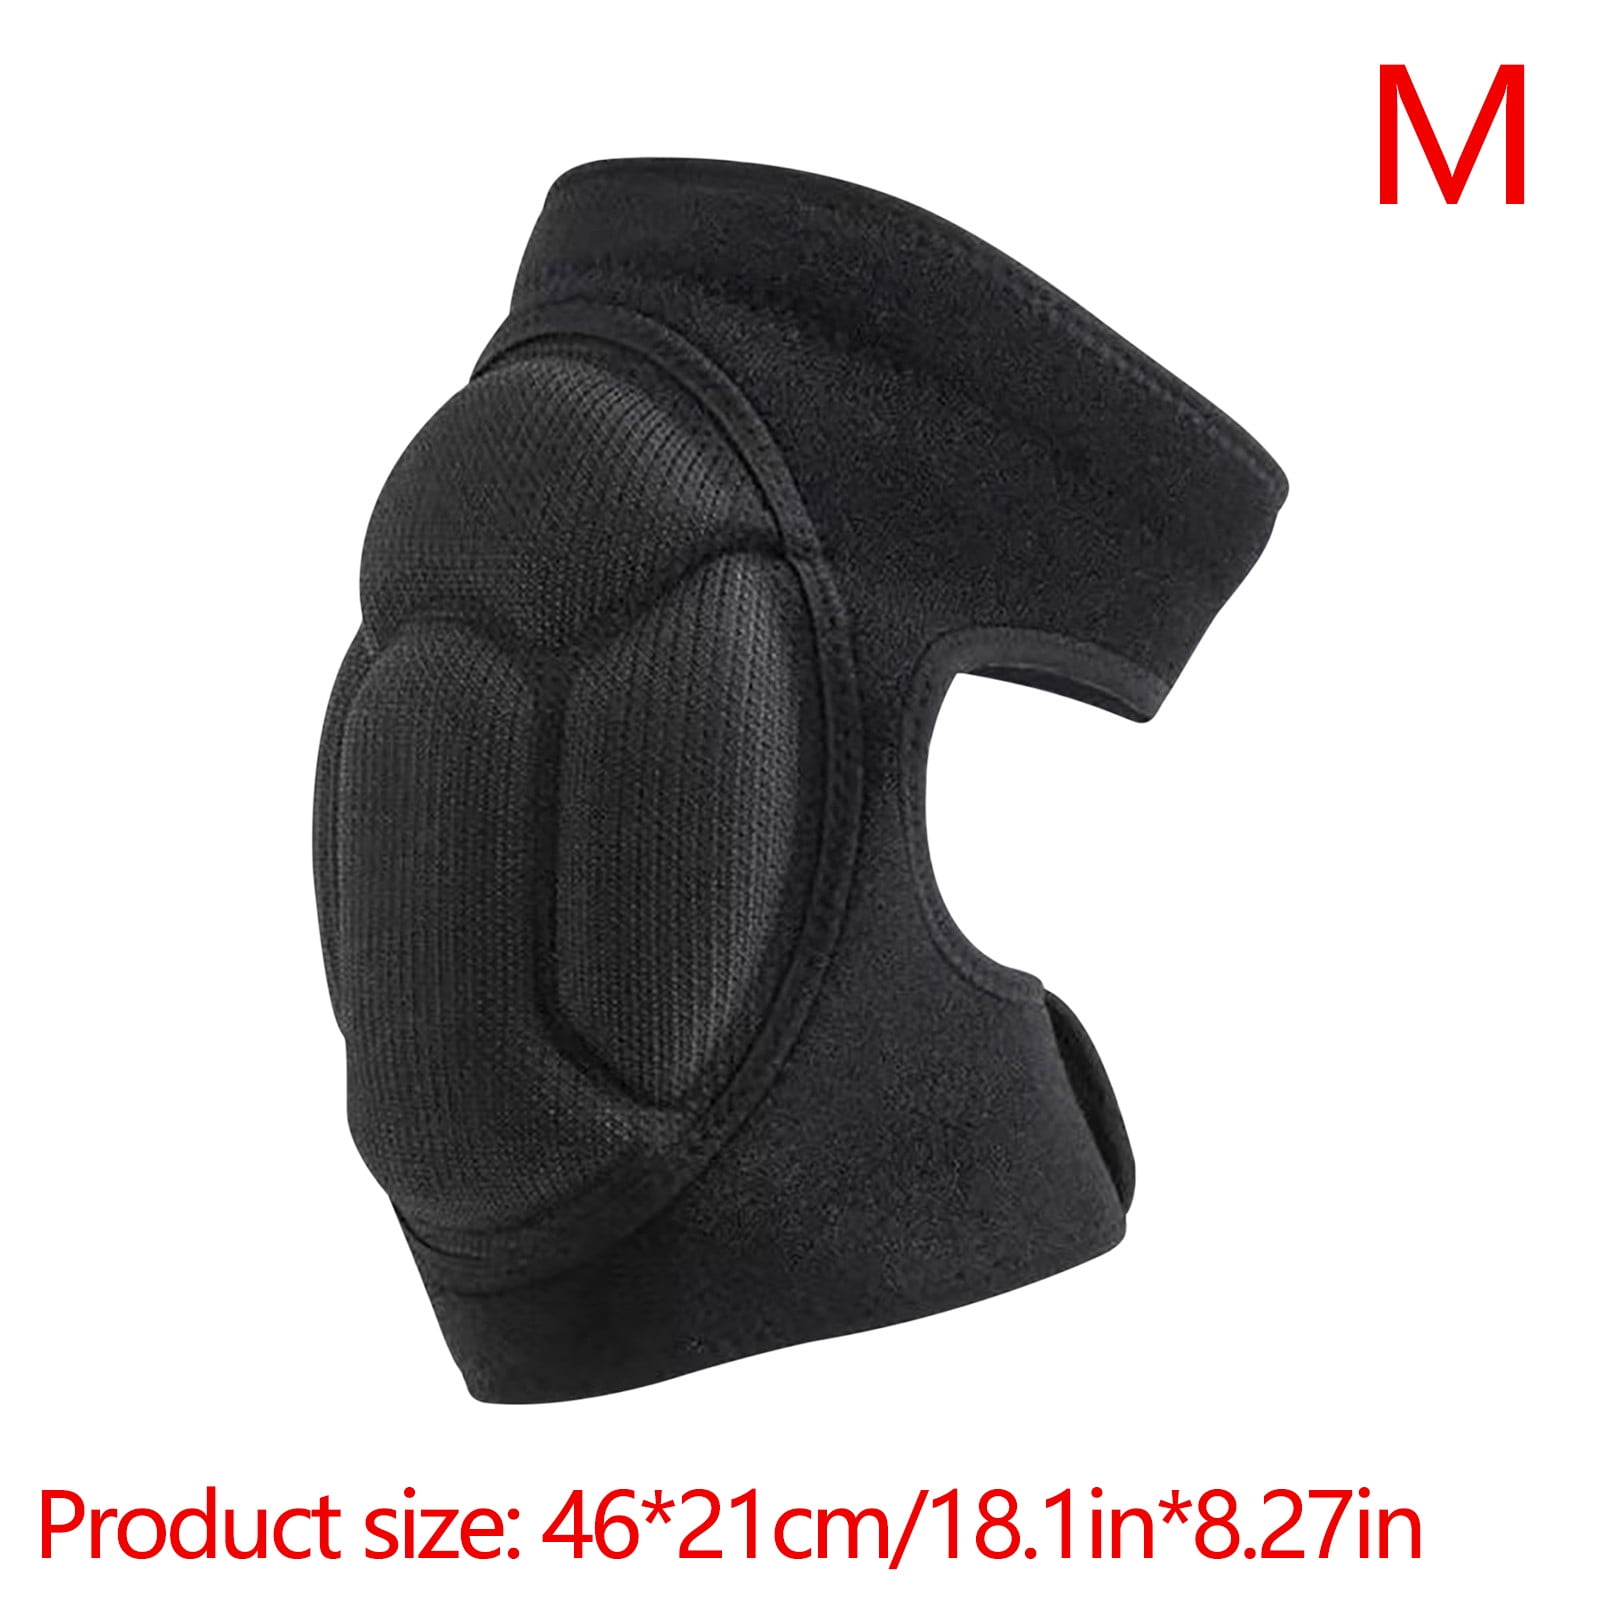 Adult Knee Pads For Gardening, Collision Avoidance Kneepads With Thick ...